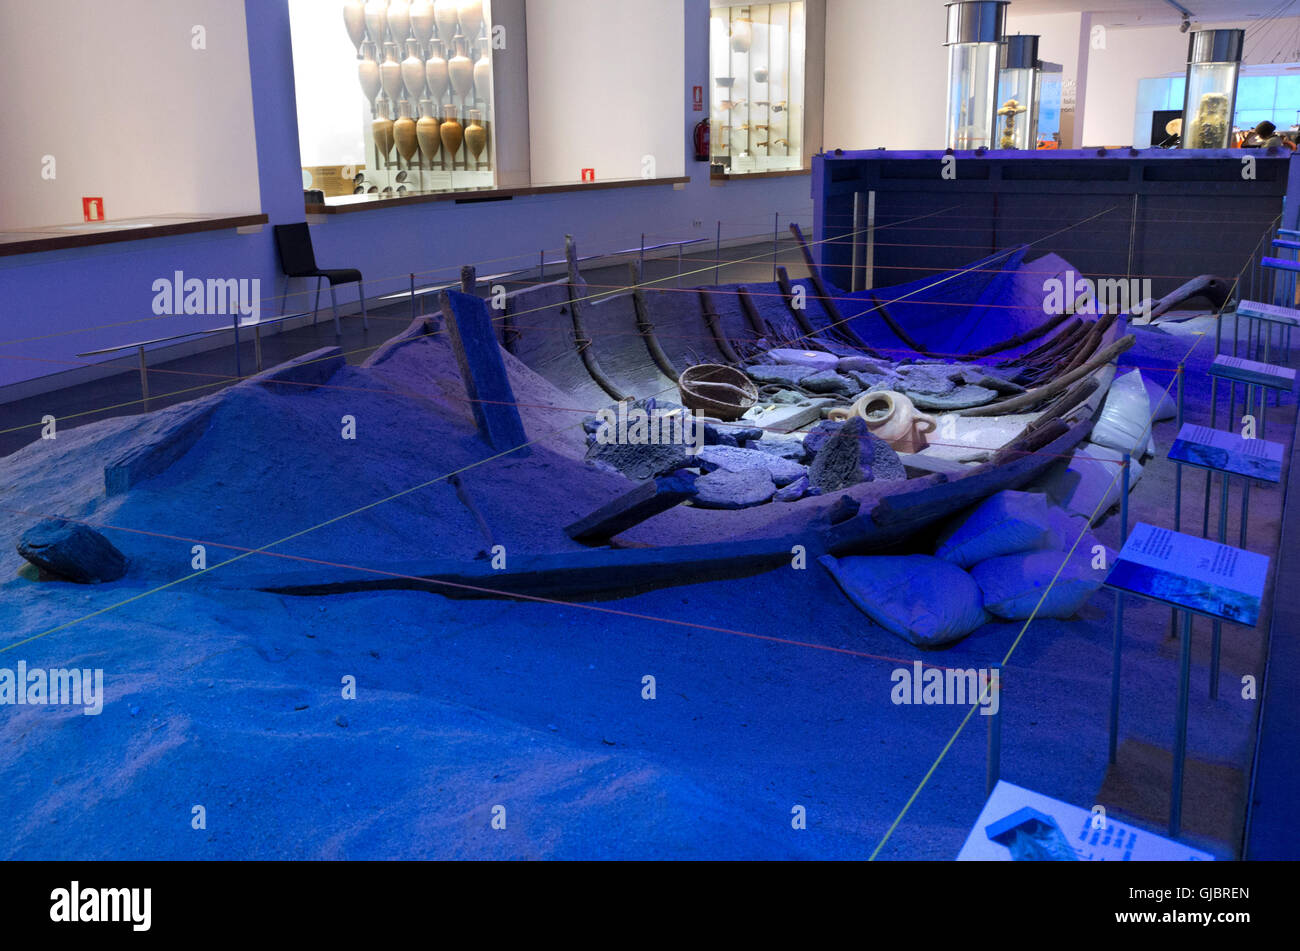 Underwater Archeology museum, remains of Phoenician shipwreck vessel Mazarron 2, displayed under protective blue light. National Stock Photo